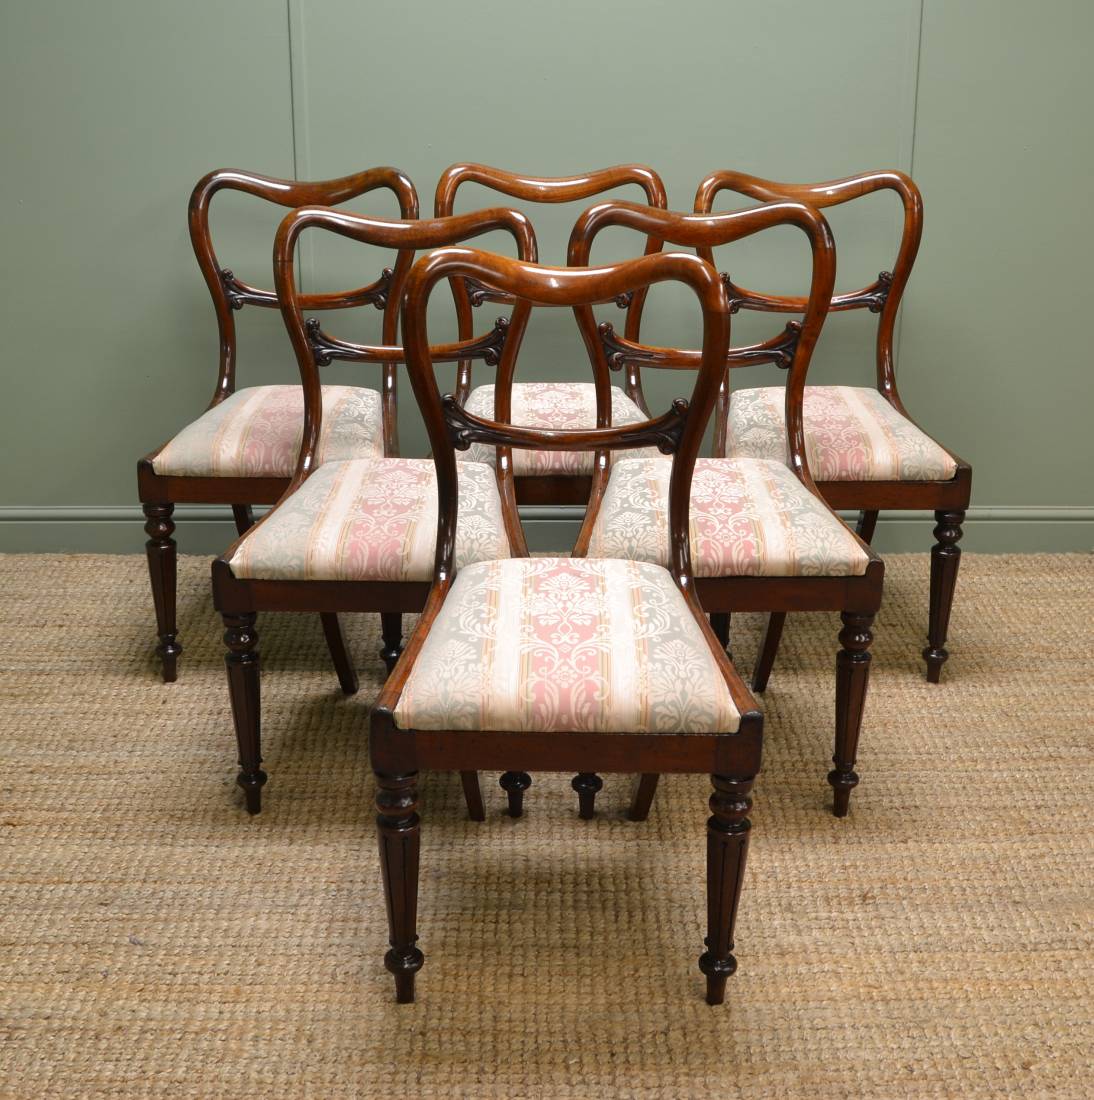 William IV Mahogany Antique Balloon Back Chairs with tulip design carvings. 